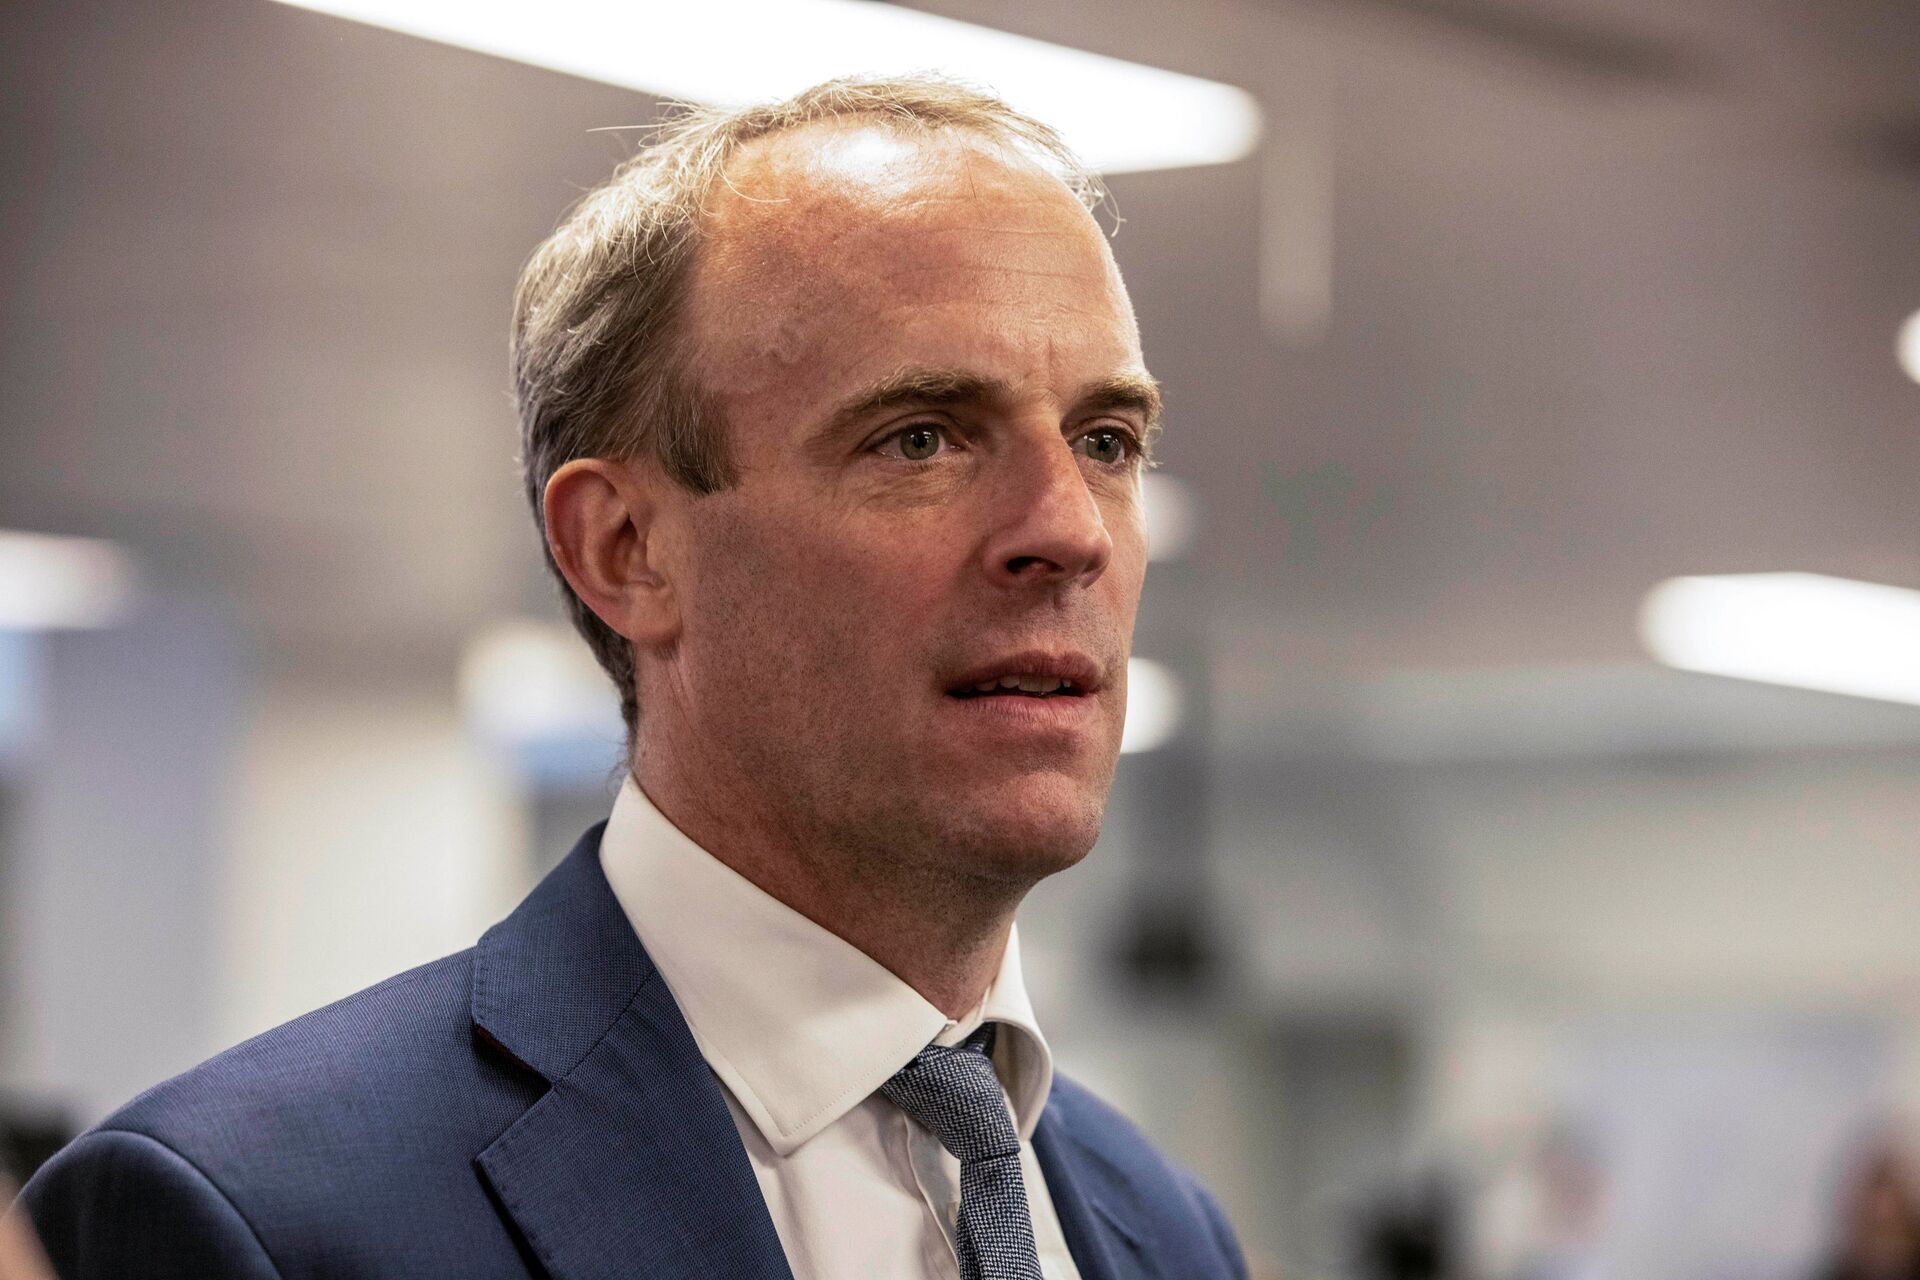 Britain's Foreign Secretary Dominic Raab looks on during a visit of Britain's Prime Minister Boris Johnson at the The Foreign, Commonwealth and Development Office (FCDO) Crisis Centre in London, Britain August 27, 2021 - Sputnik International, 1920, 23.01.2022